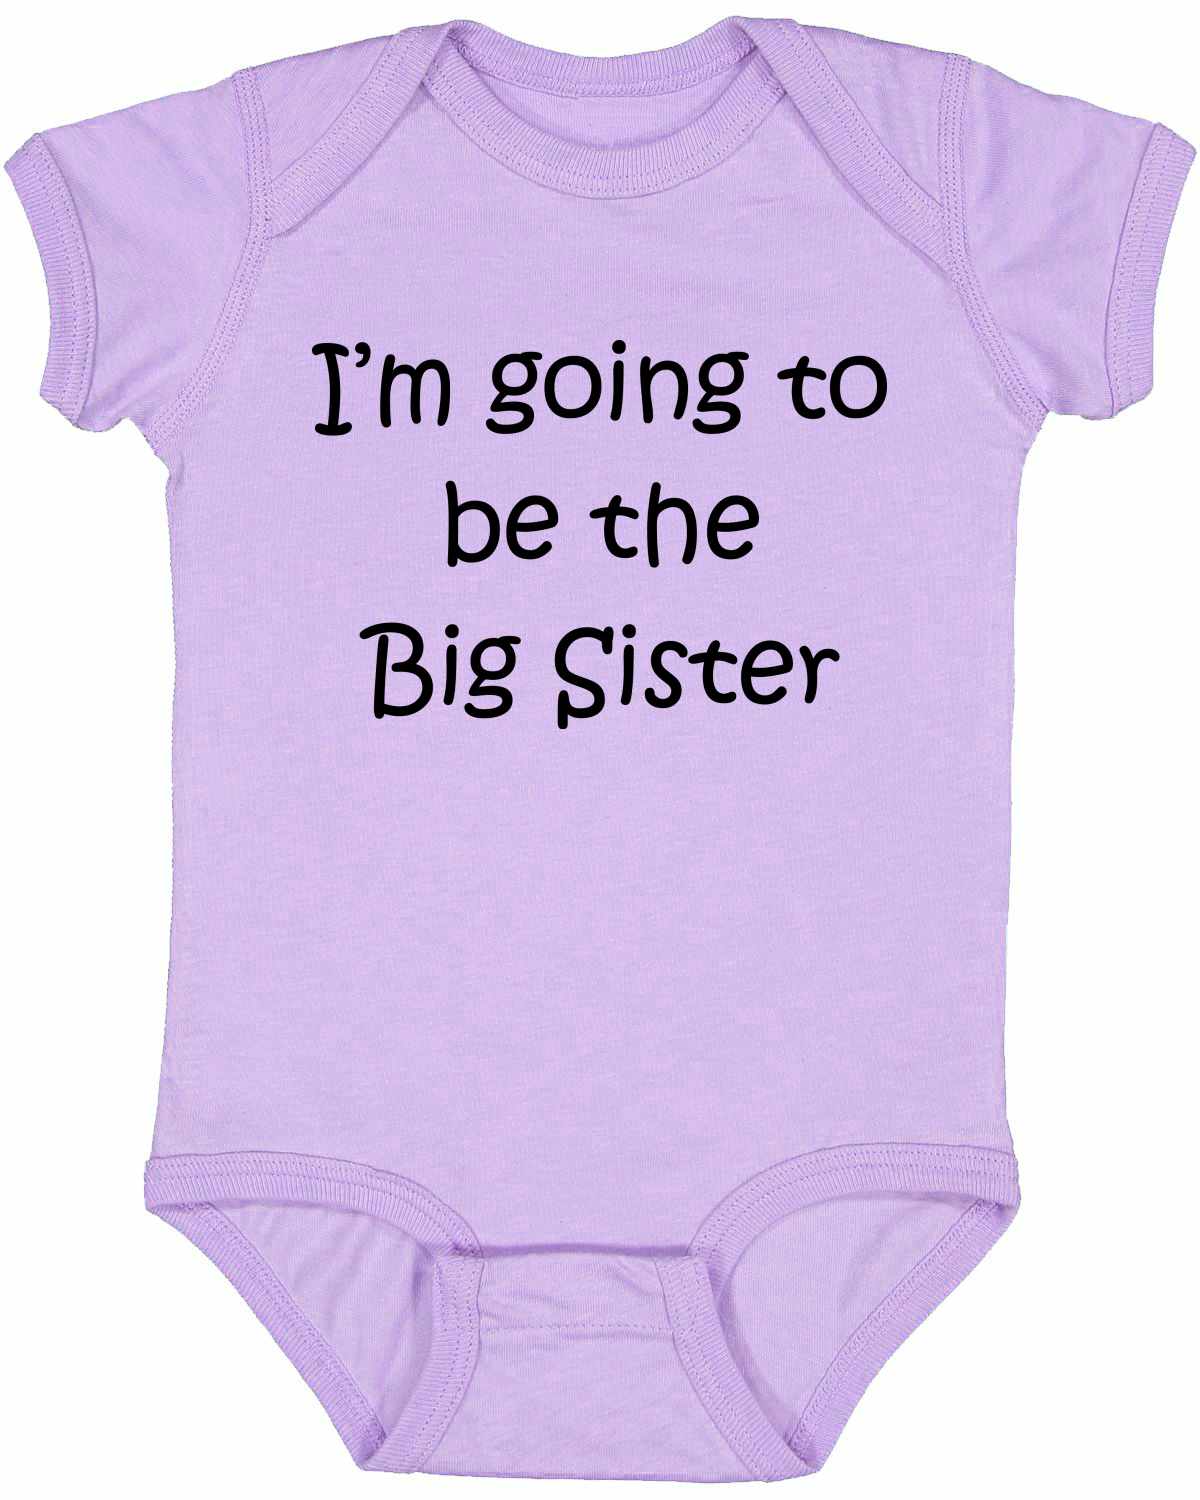 I'M GOING TO BE THE BIG SISTER on Infant BodySuit